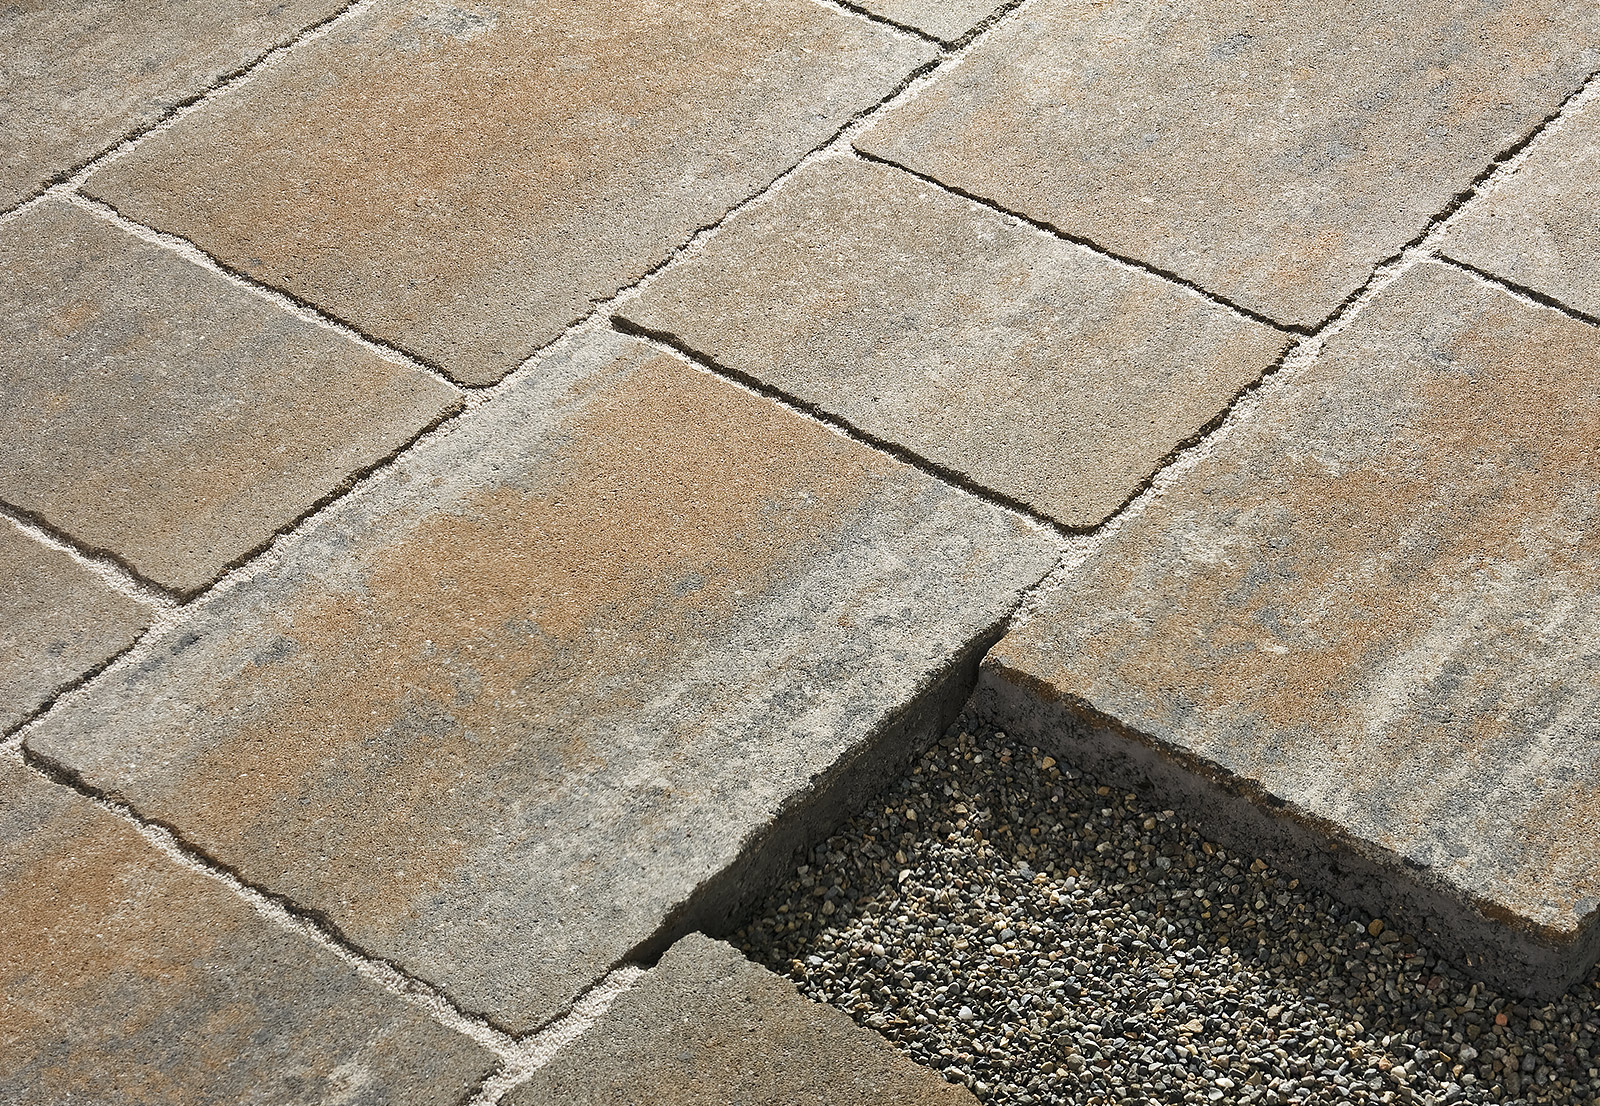 Distressed multi sized paver with extreme size differences in both dimensions